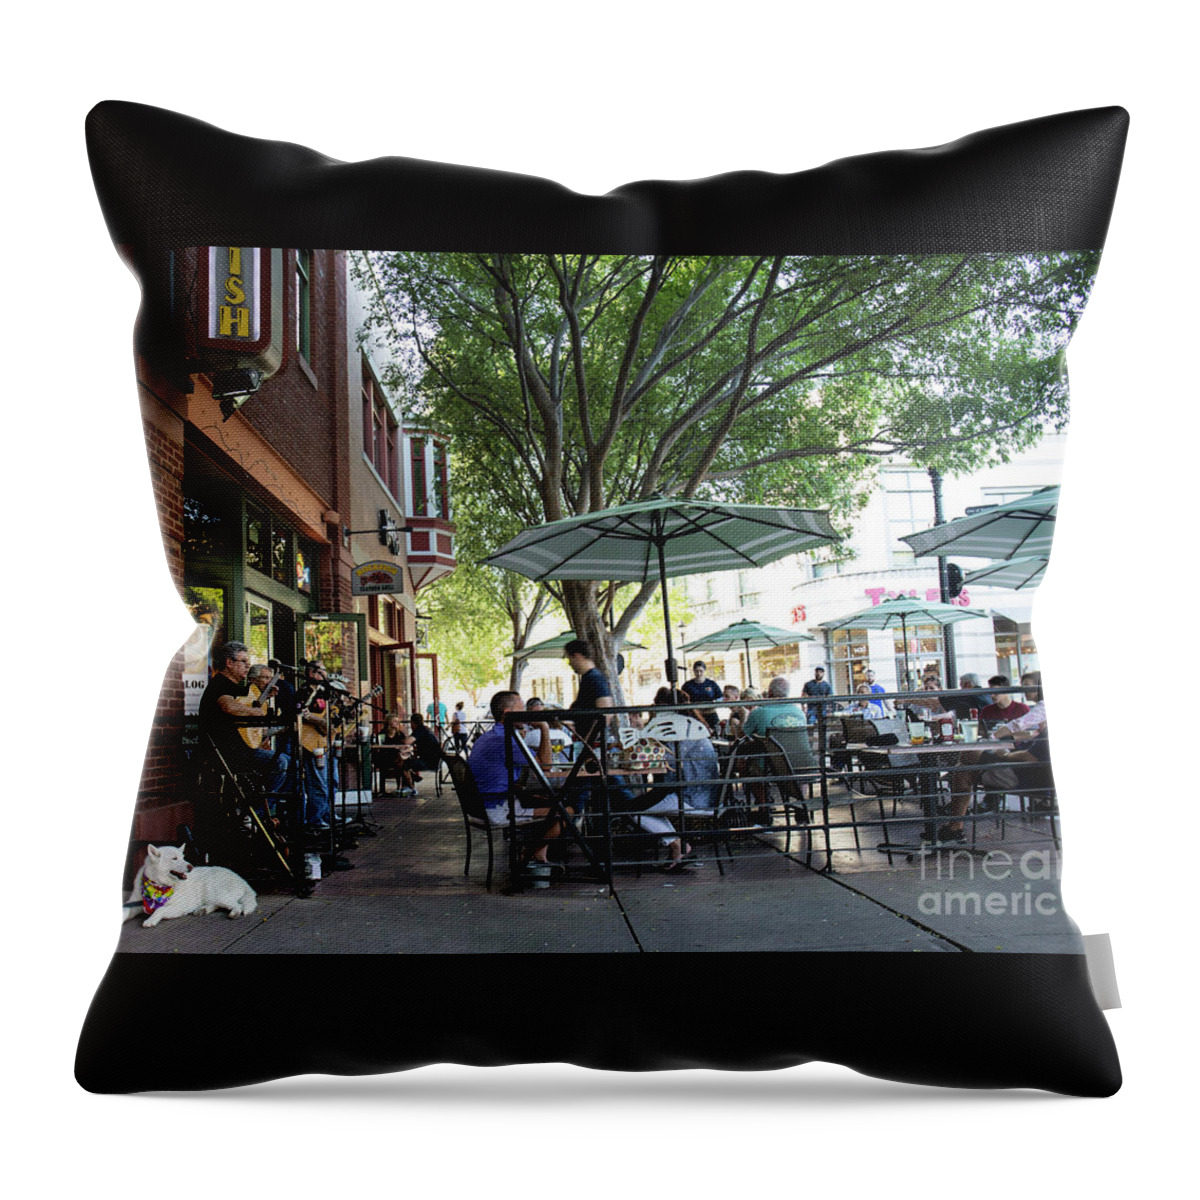 Dog Throw Pillow featuring the photograph The Musician's Dog by May Finch